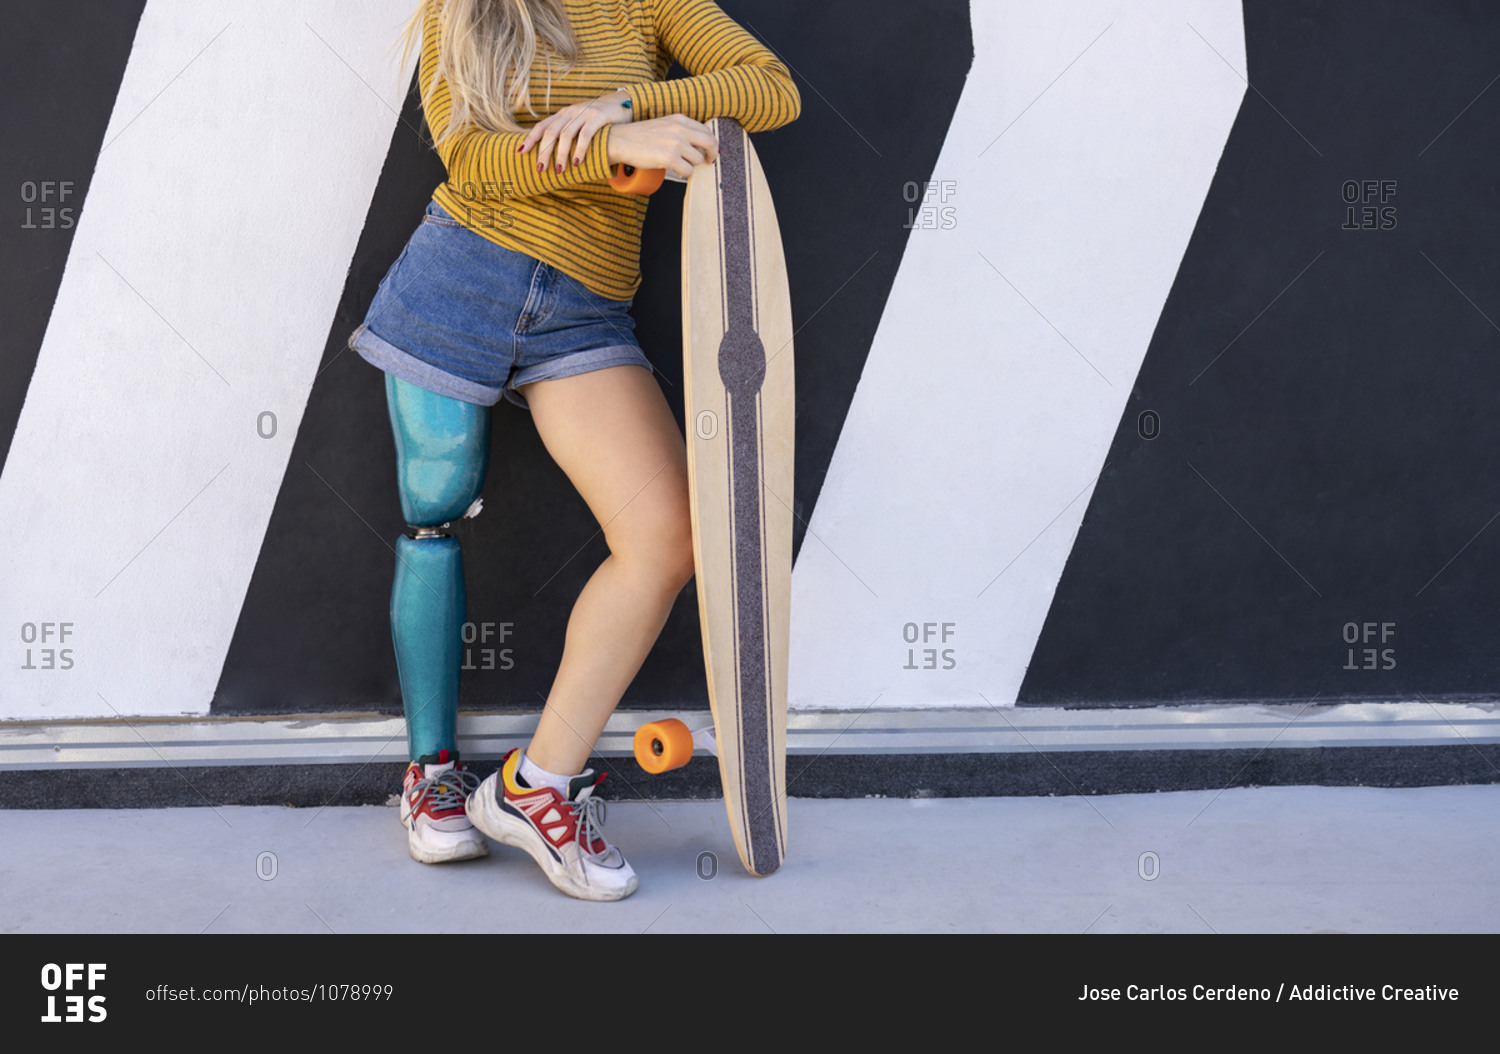 Unrecognizable female skater with bionic prosthesis of leg standing near building in street